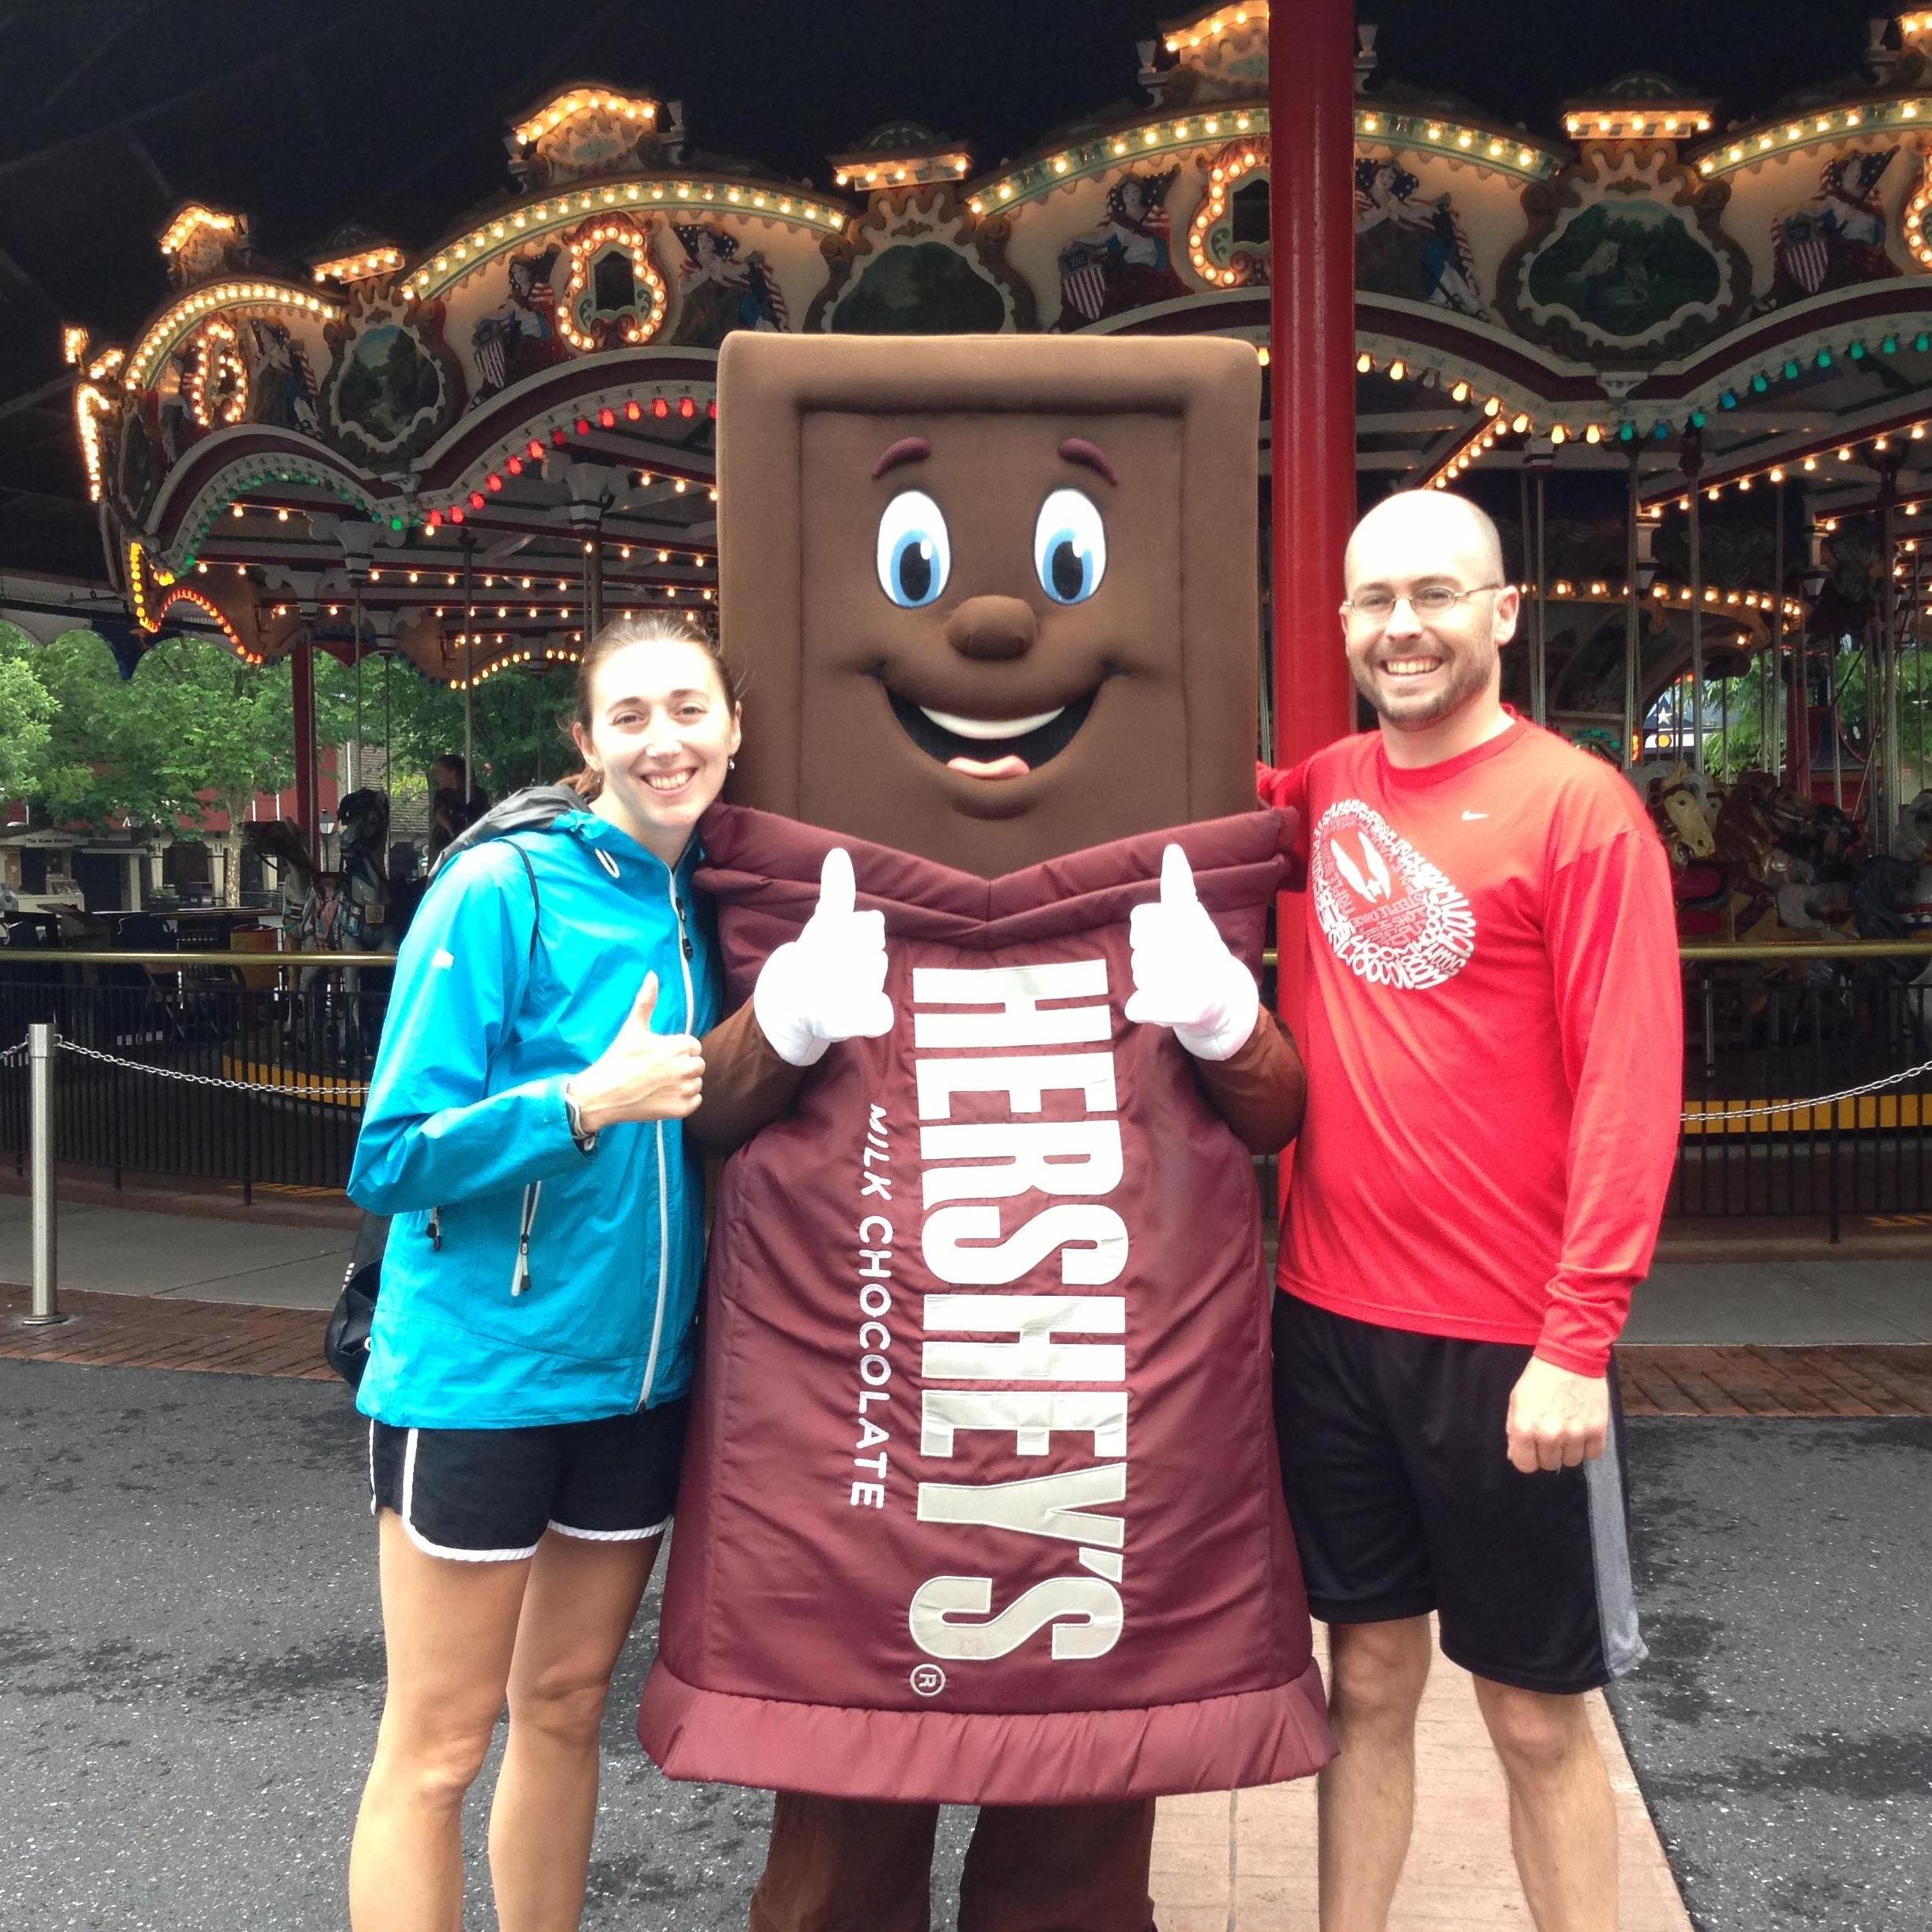 Our favorite things in one photo: each other and chocolate!